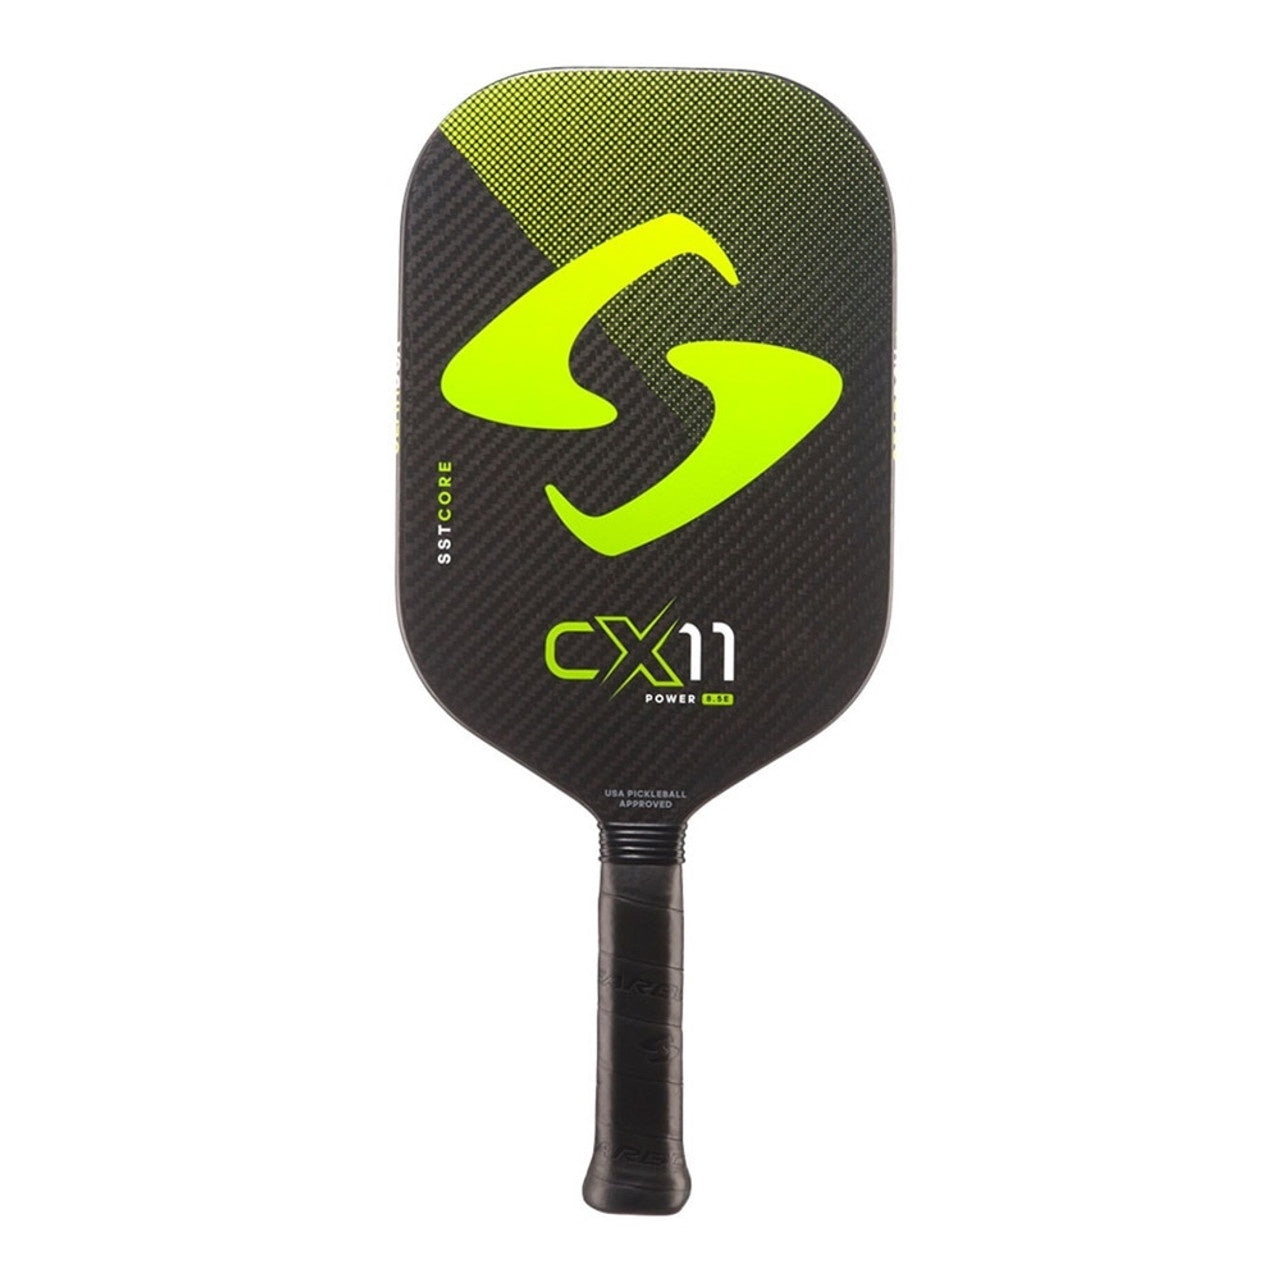 Gearbox - CX11E Power Pickleball Paddle - Grip 3 15/16" - Green